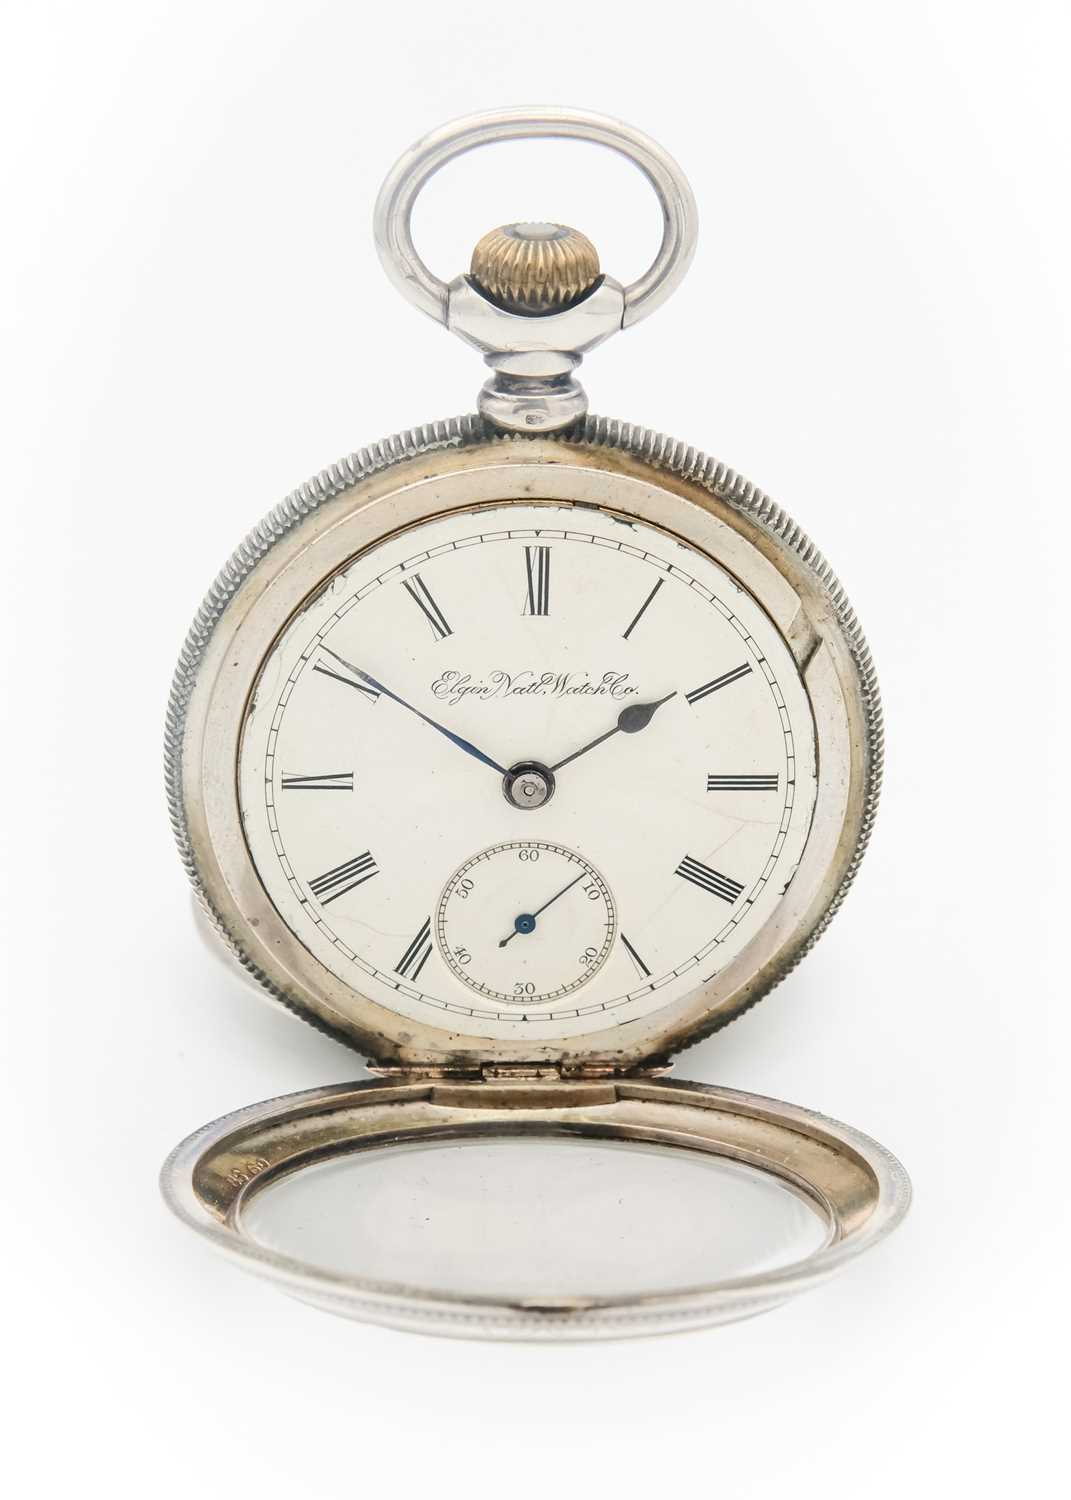 ELGIN - A large silver cased crown wind lever pocket watch. - Image 2 of 6